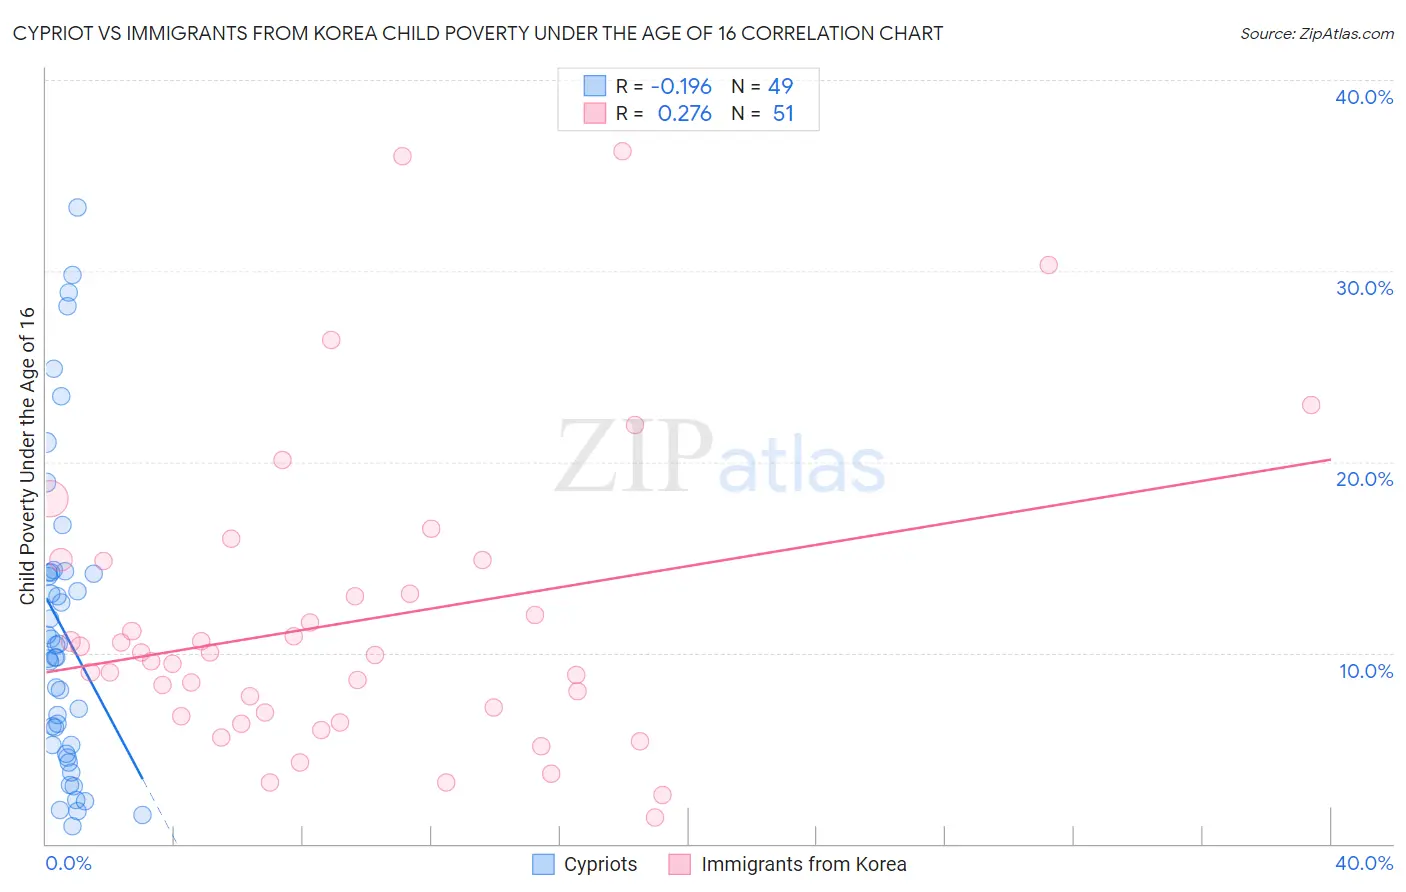 Cypriot vs Immigrants from Korea Child Poverty Under the Age of 16